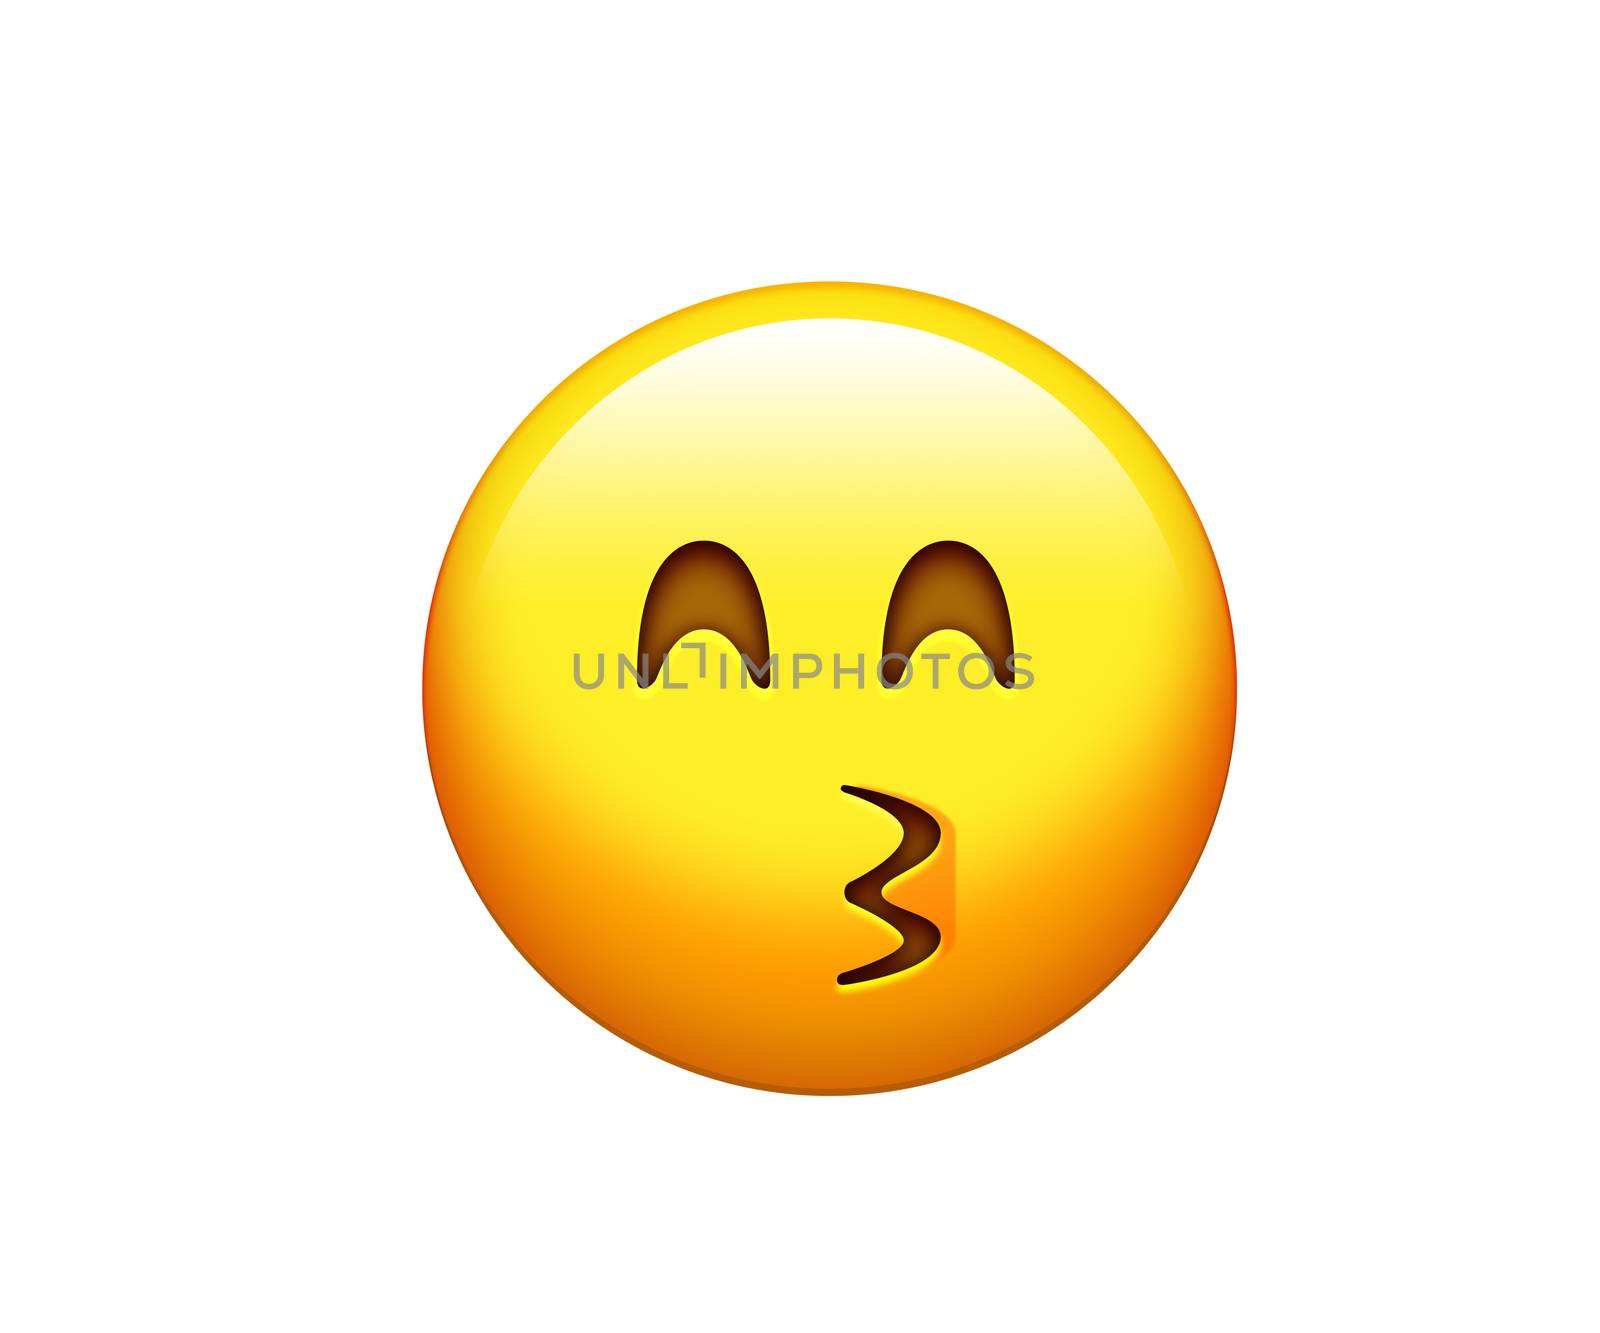 The isolated yellow smiley face with kissing mouth icon